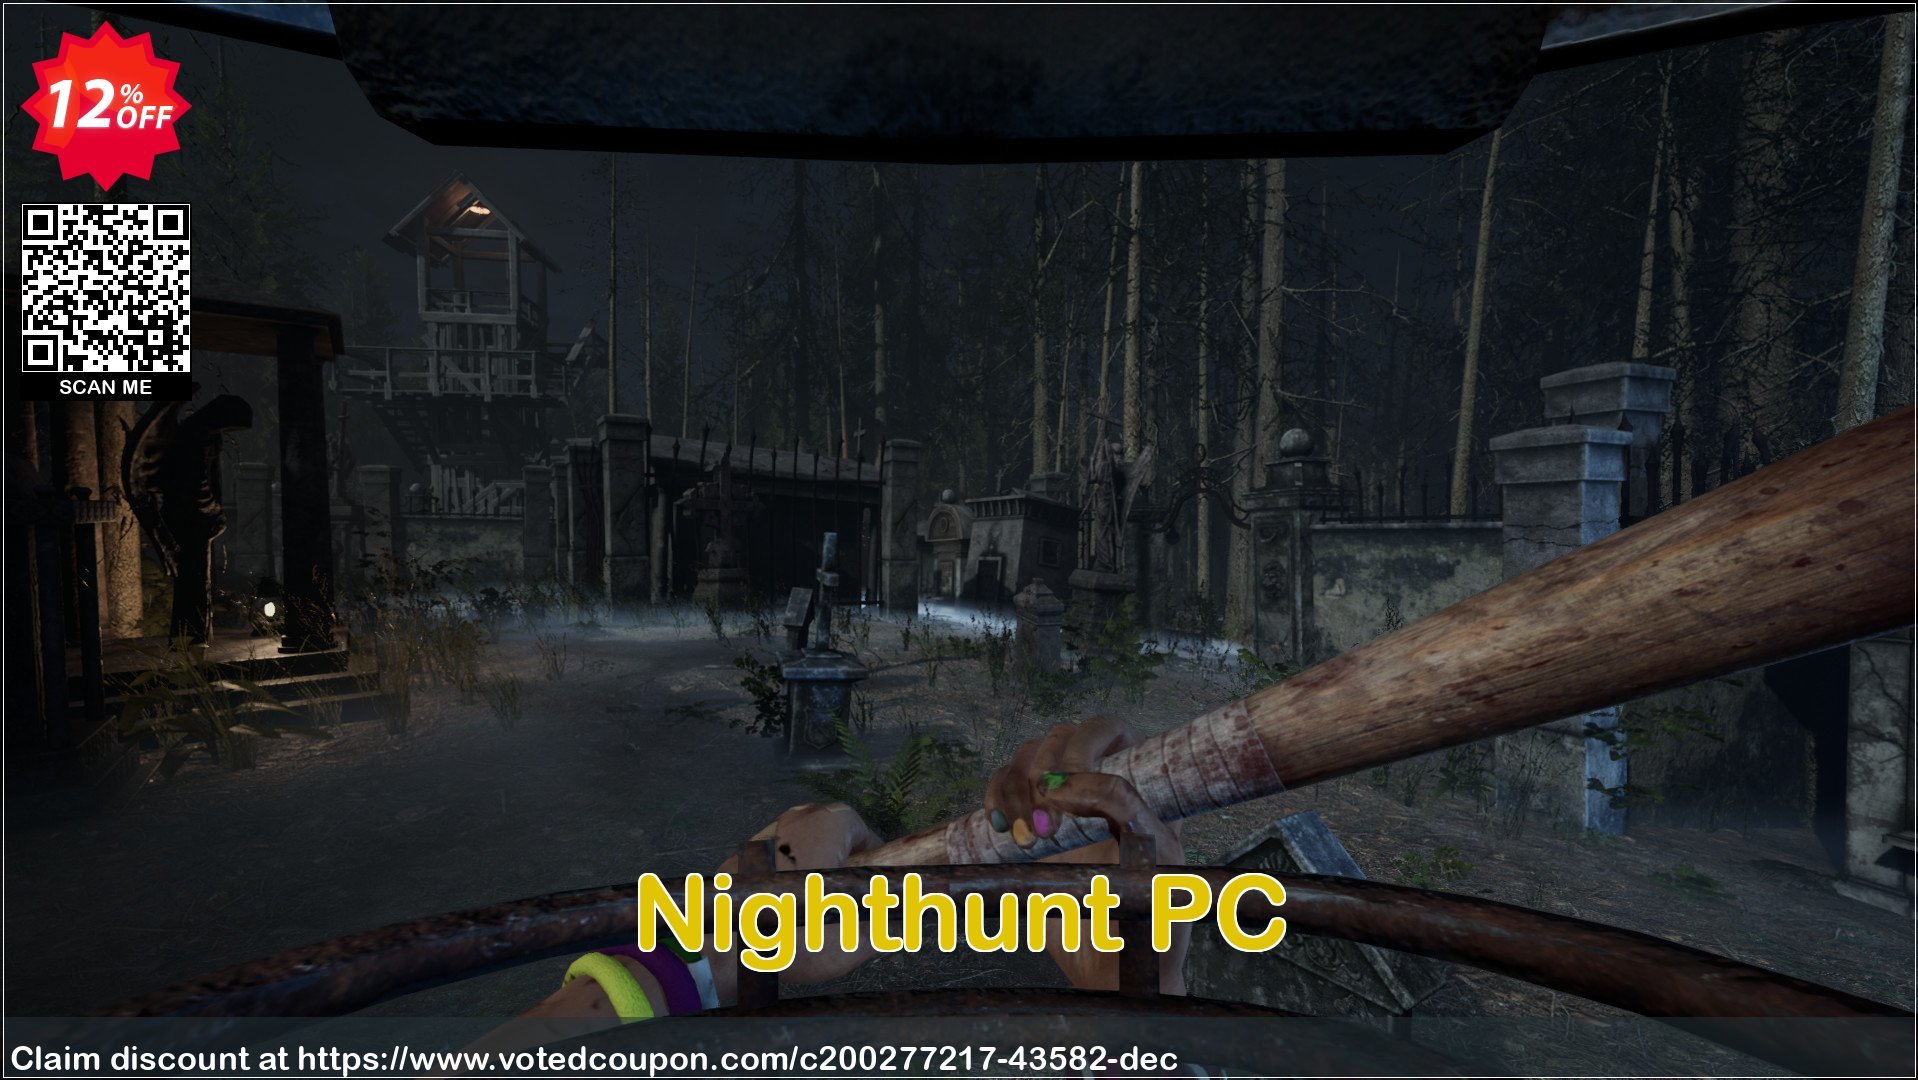 Nighthunt PC Coupon Code May 2024, 12% OFF - VotedCoupon